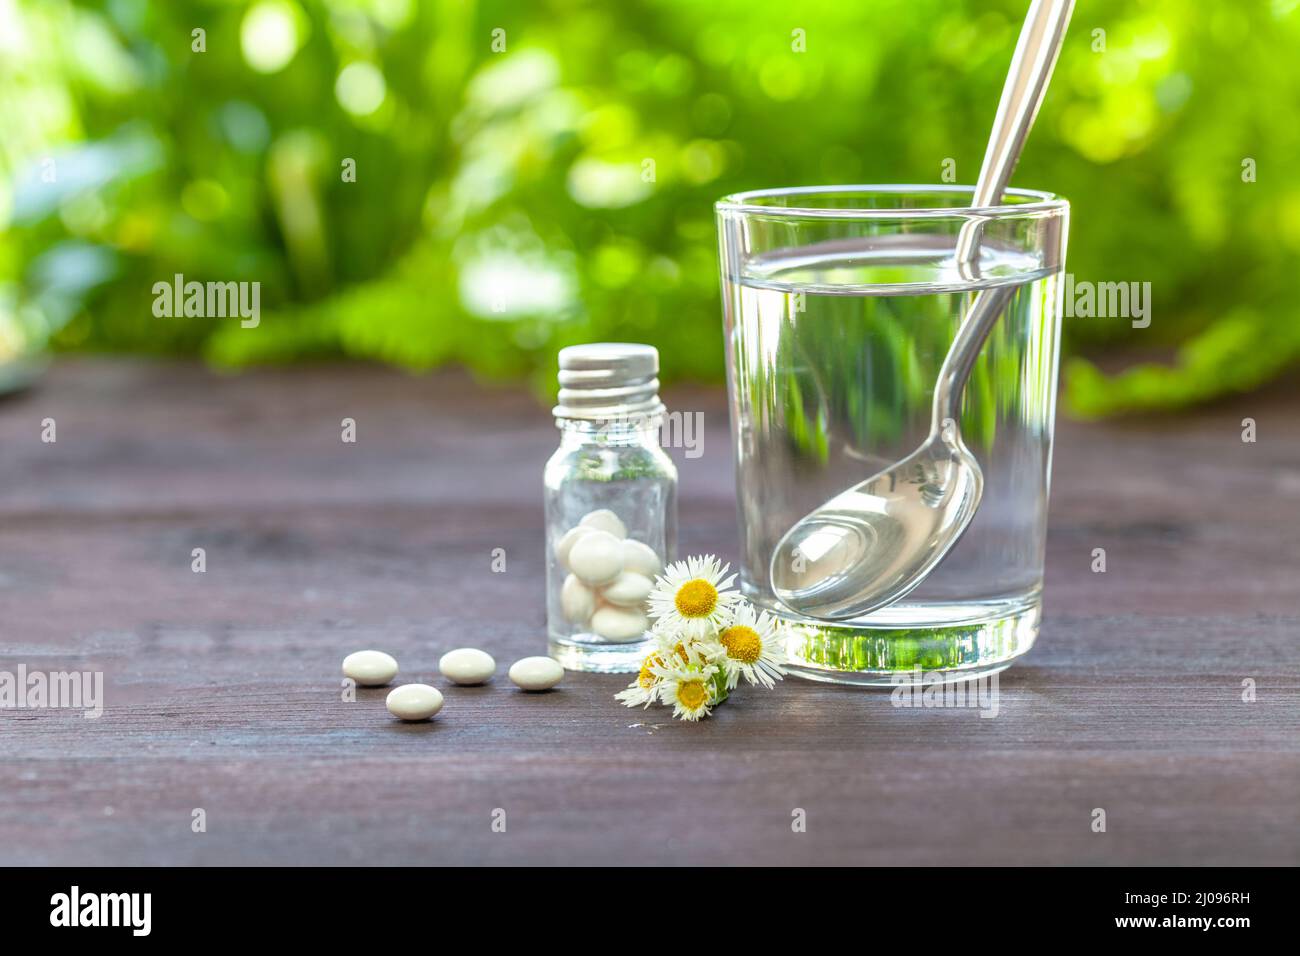 Homeopathic concept. Drinking glass with water, dragees and chamomile on a wooden table. Bright green in the background. Focus on the foreground. Stock Photo